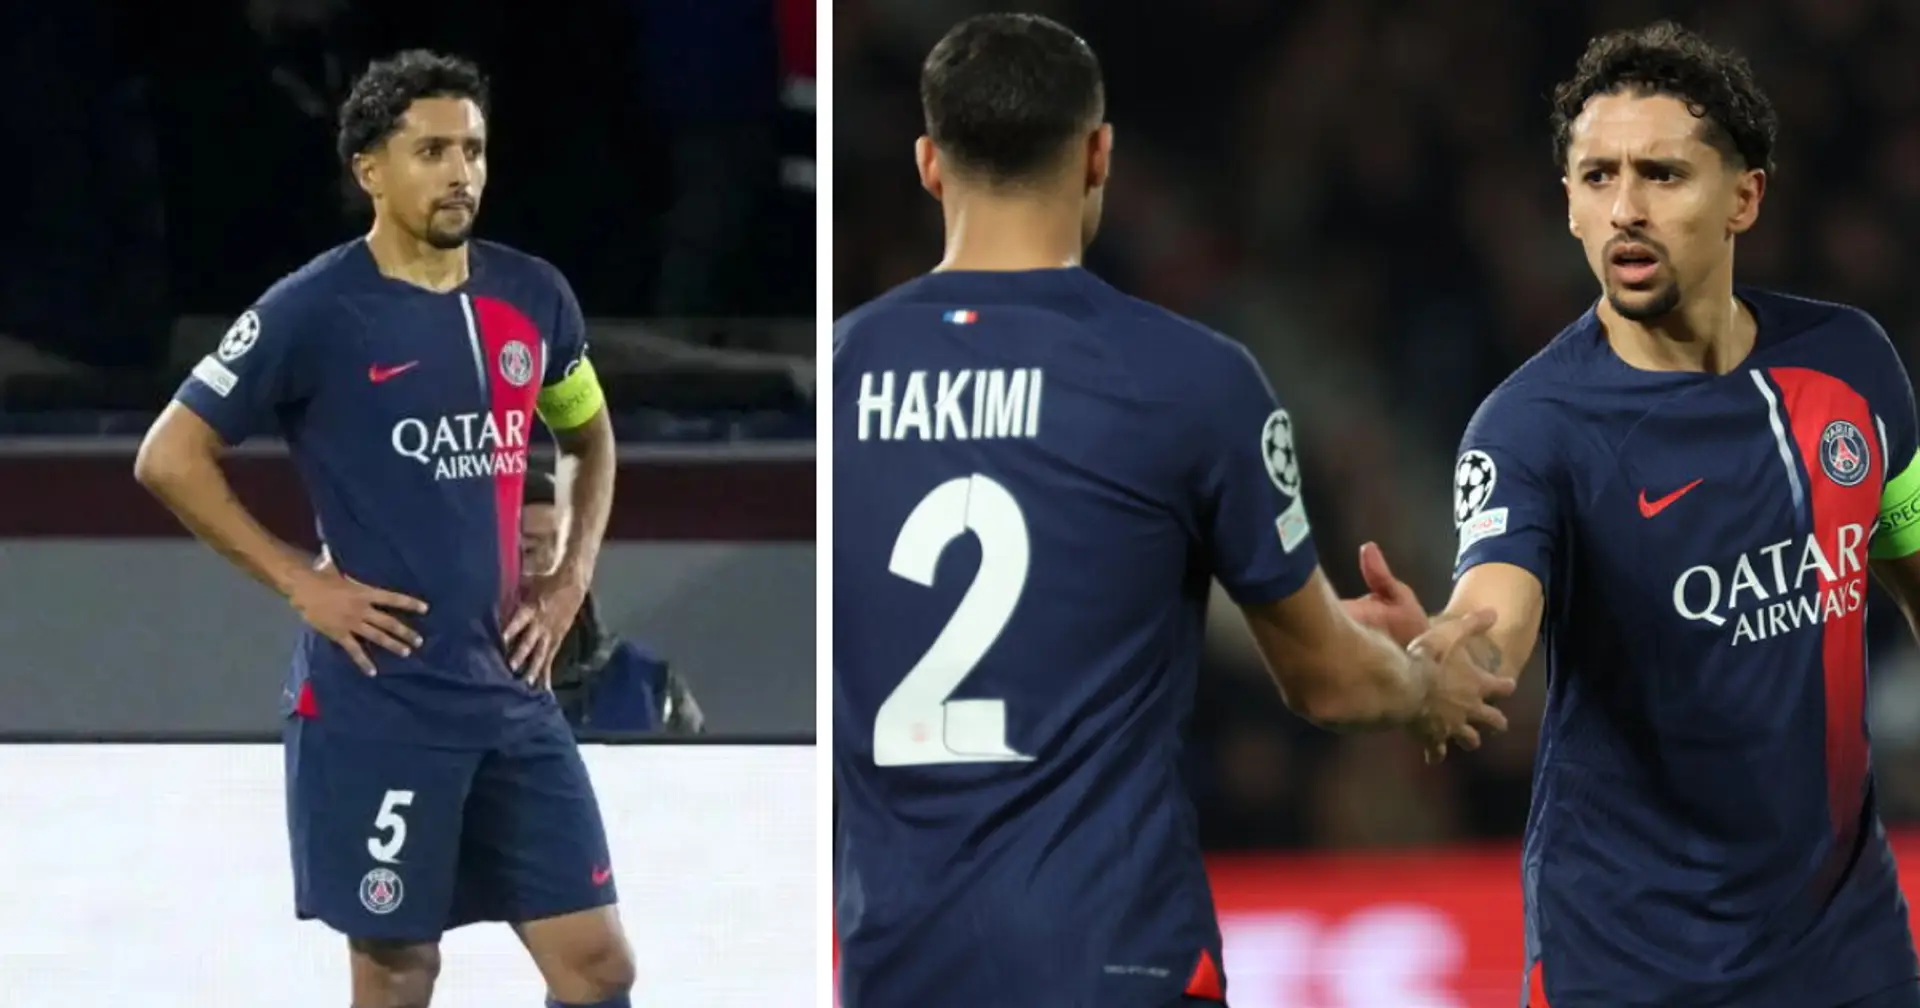 Marquinhos told he 'plays like he has s*** on his thighs' despite PSG beating Real Sociedad in Champions League